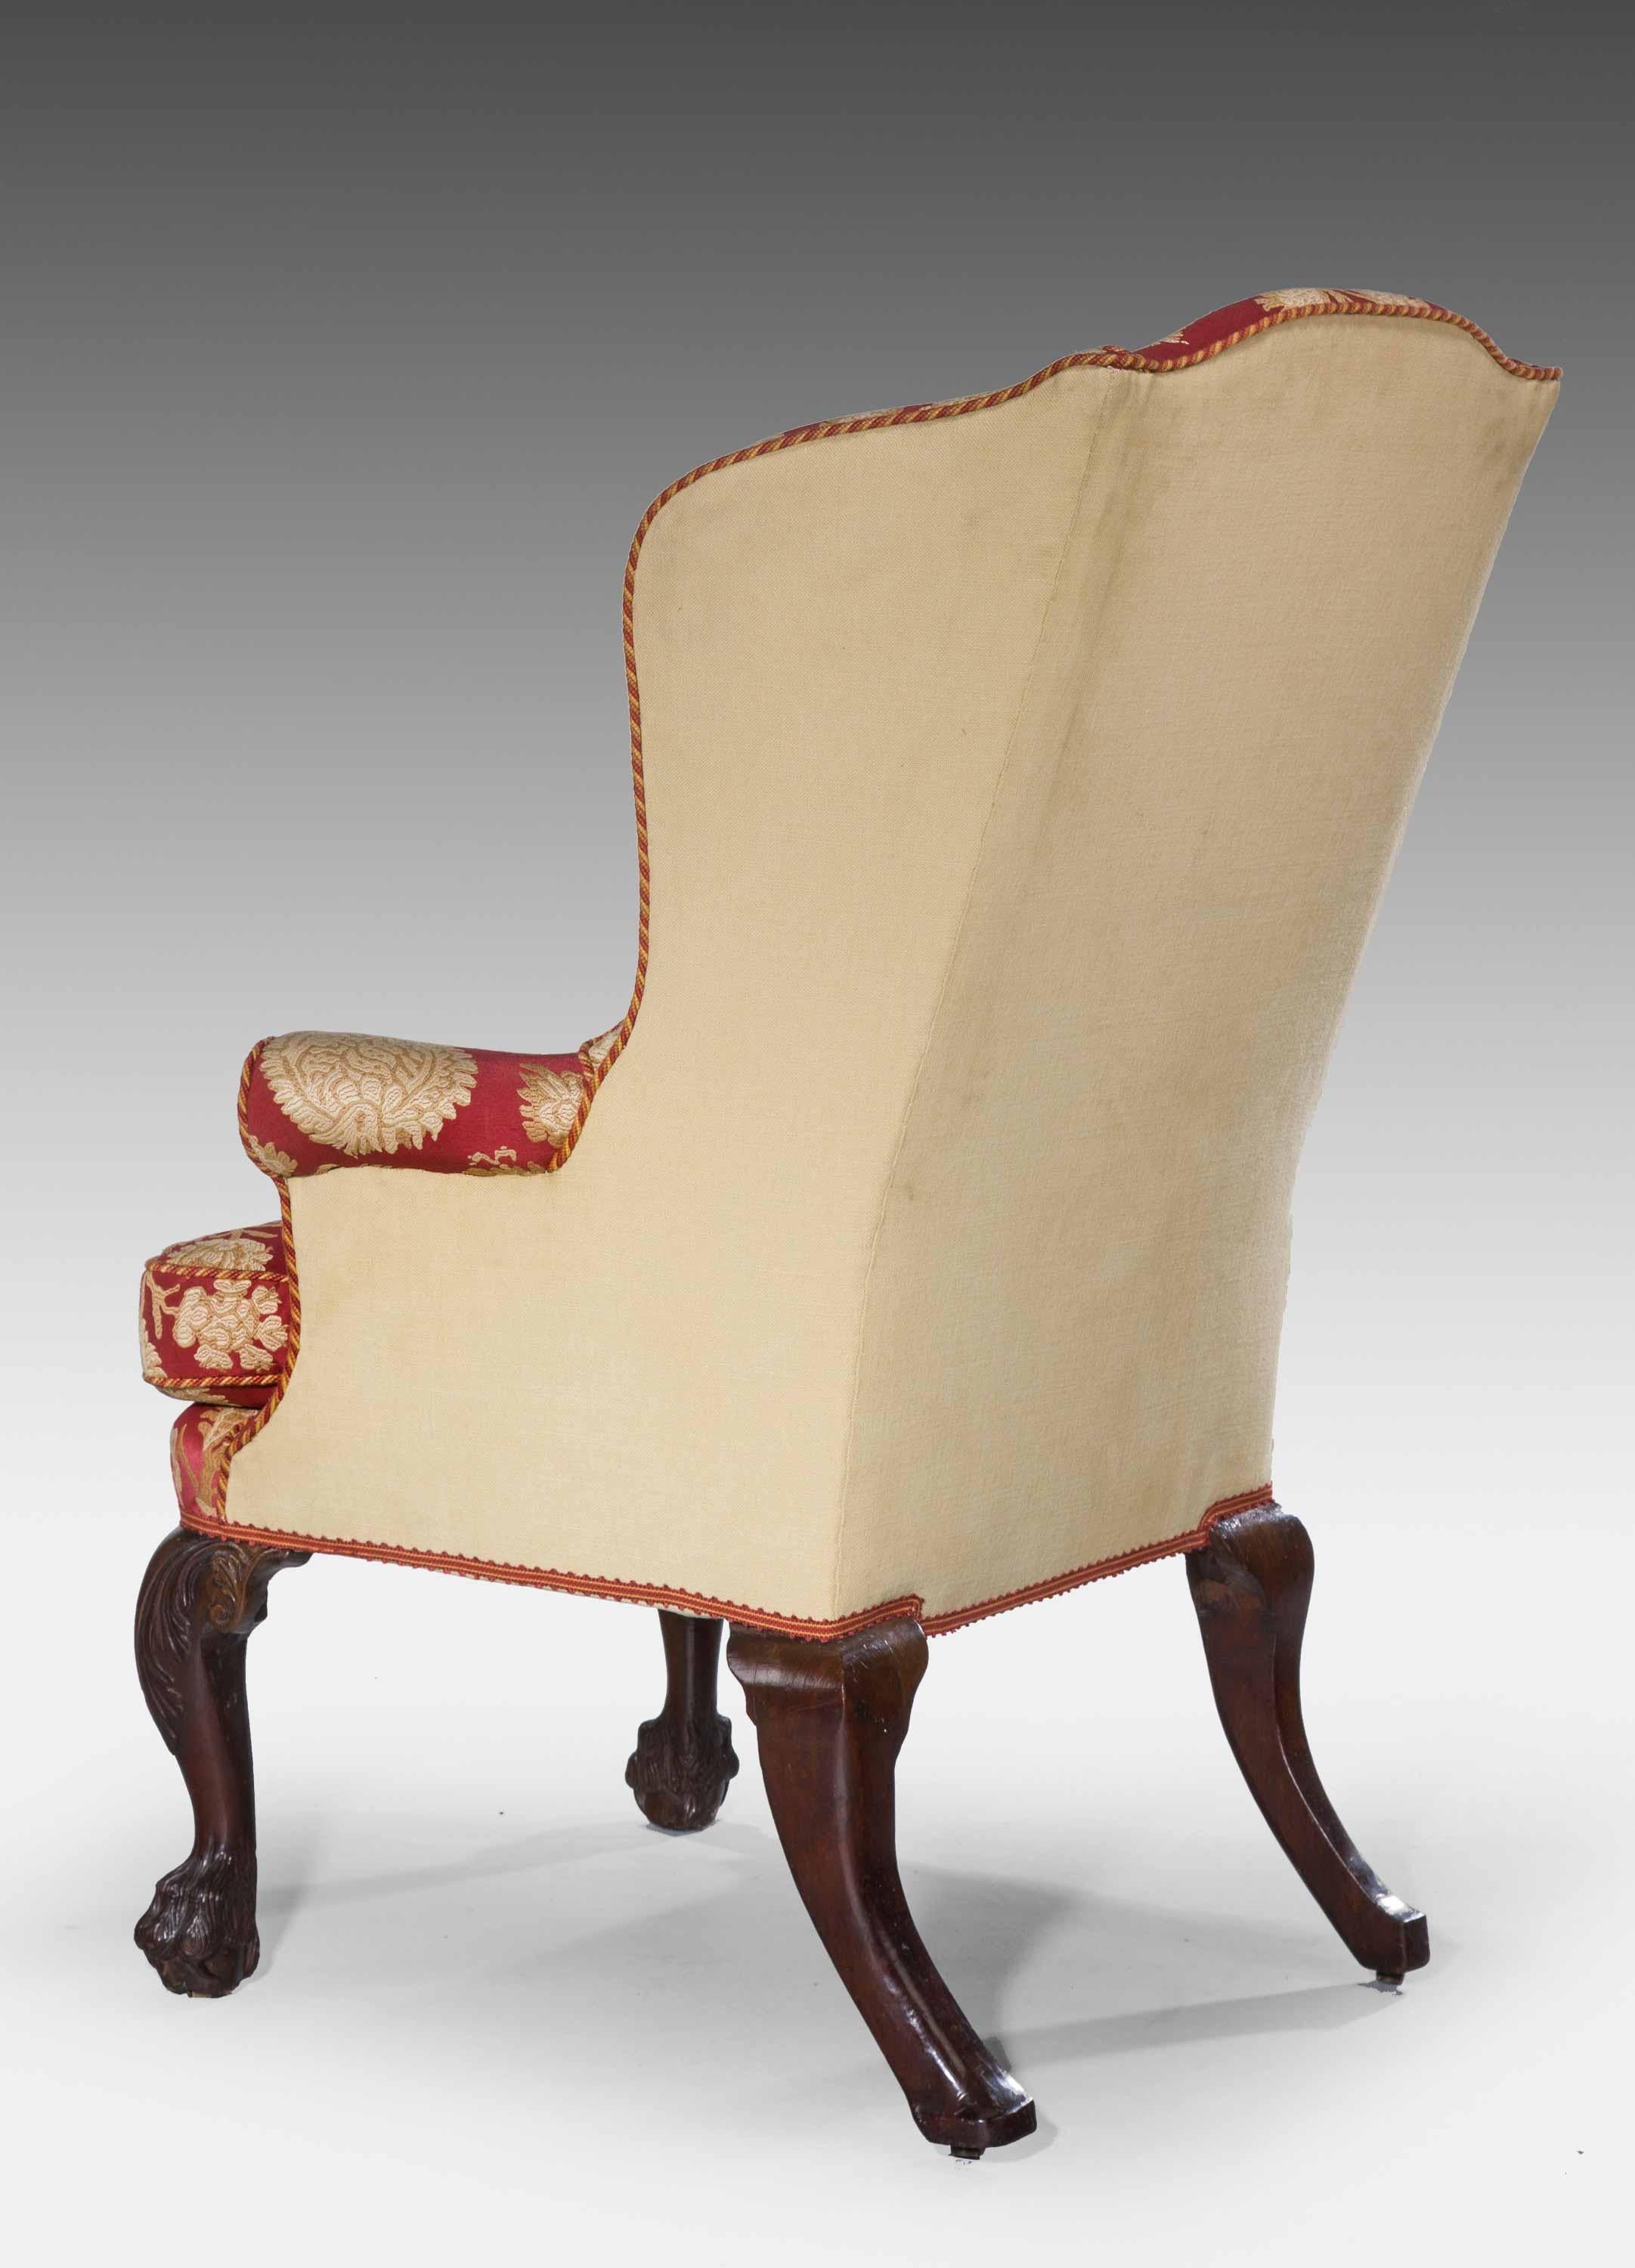 George II Period Walnut Wing Chair In Excellent Condition In Peterborough, Northamptonshire